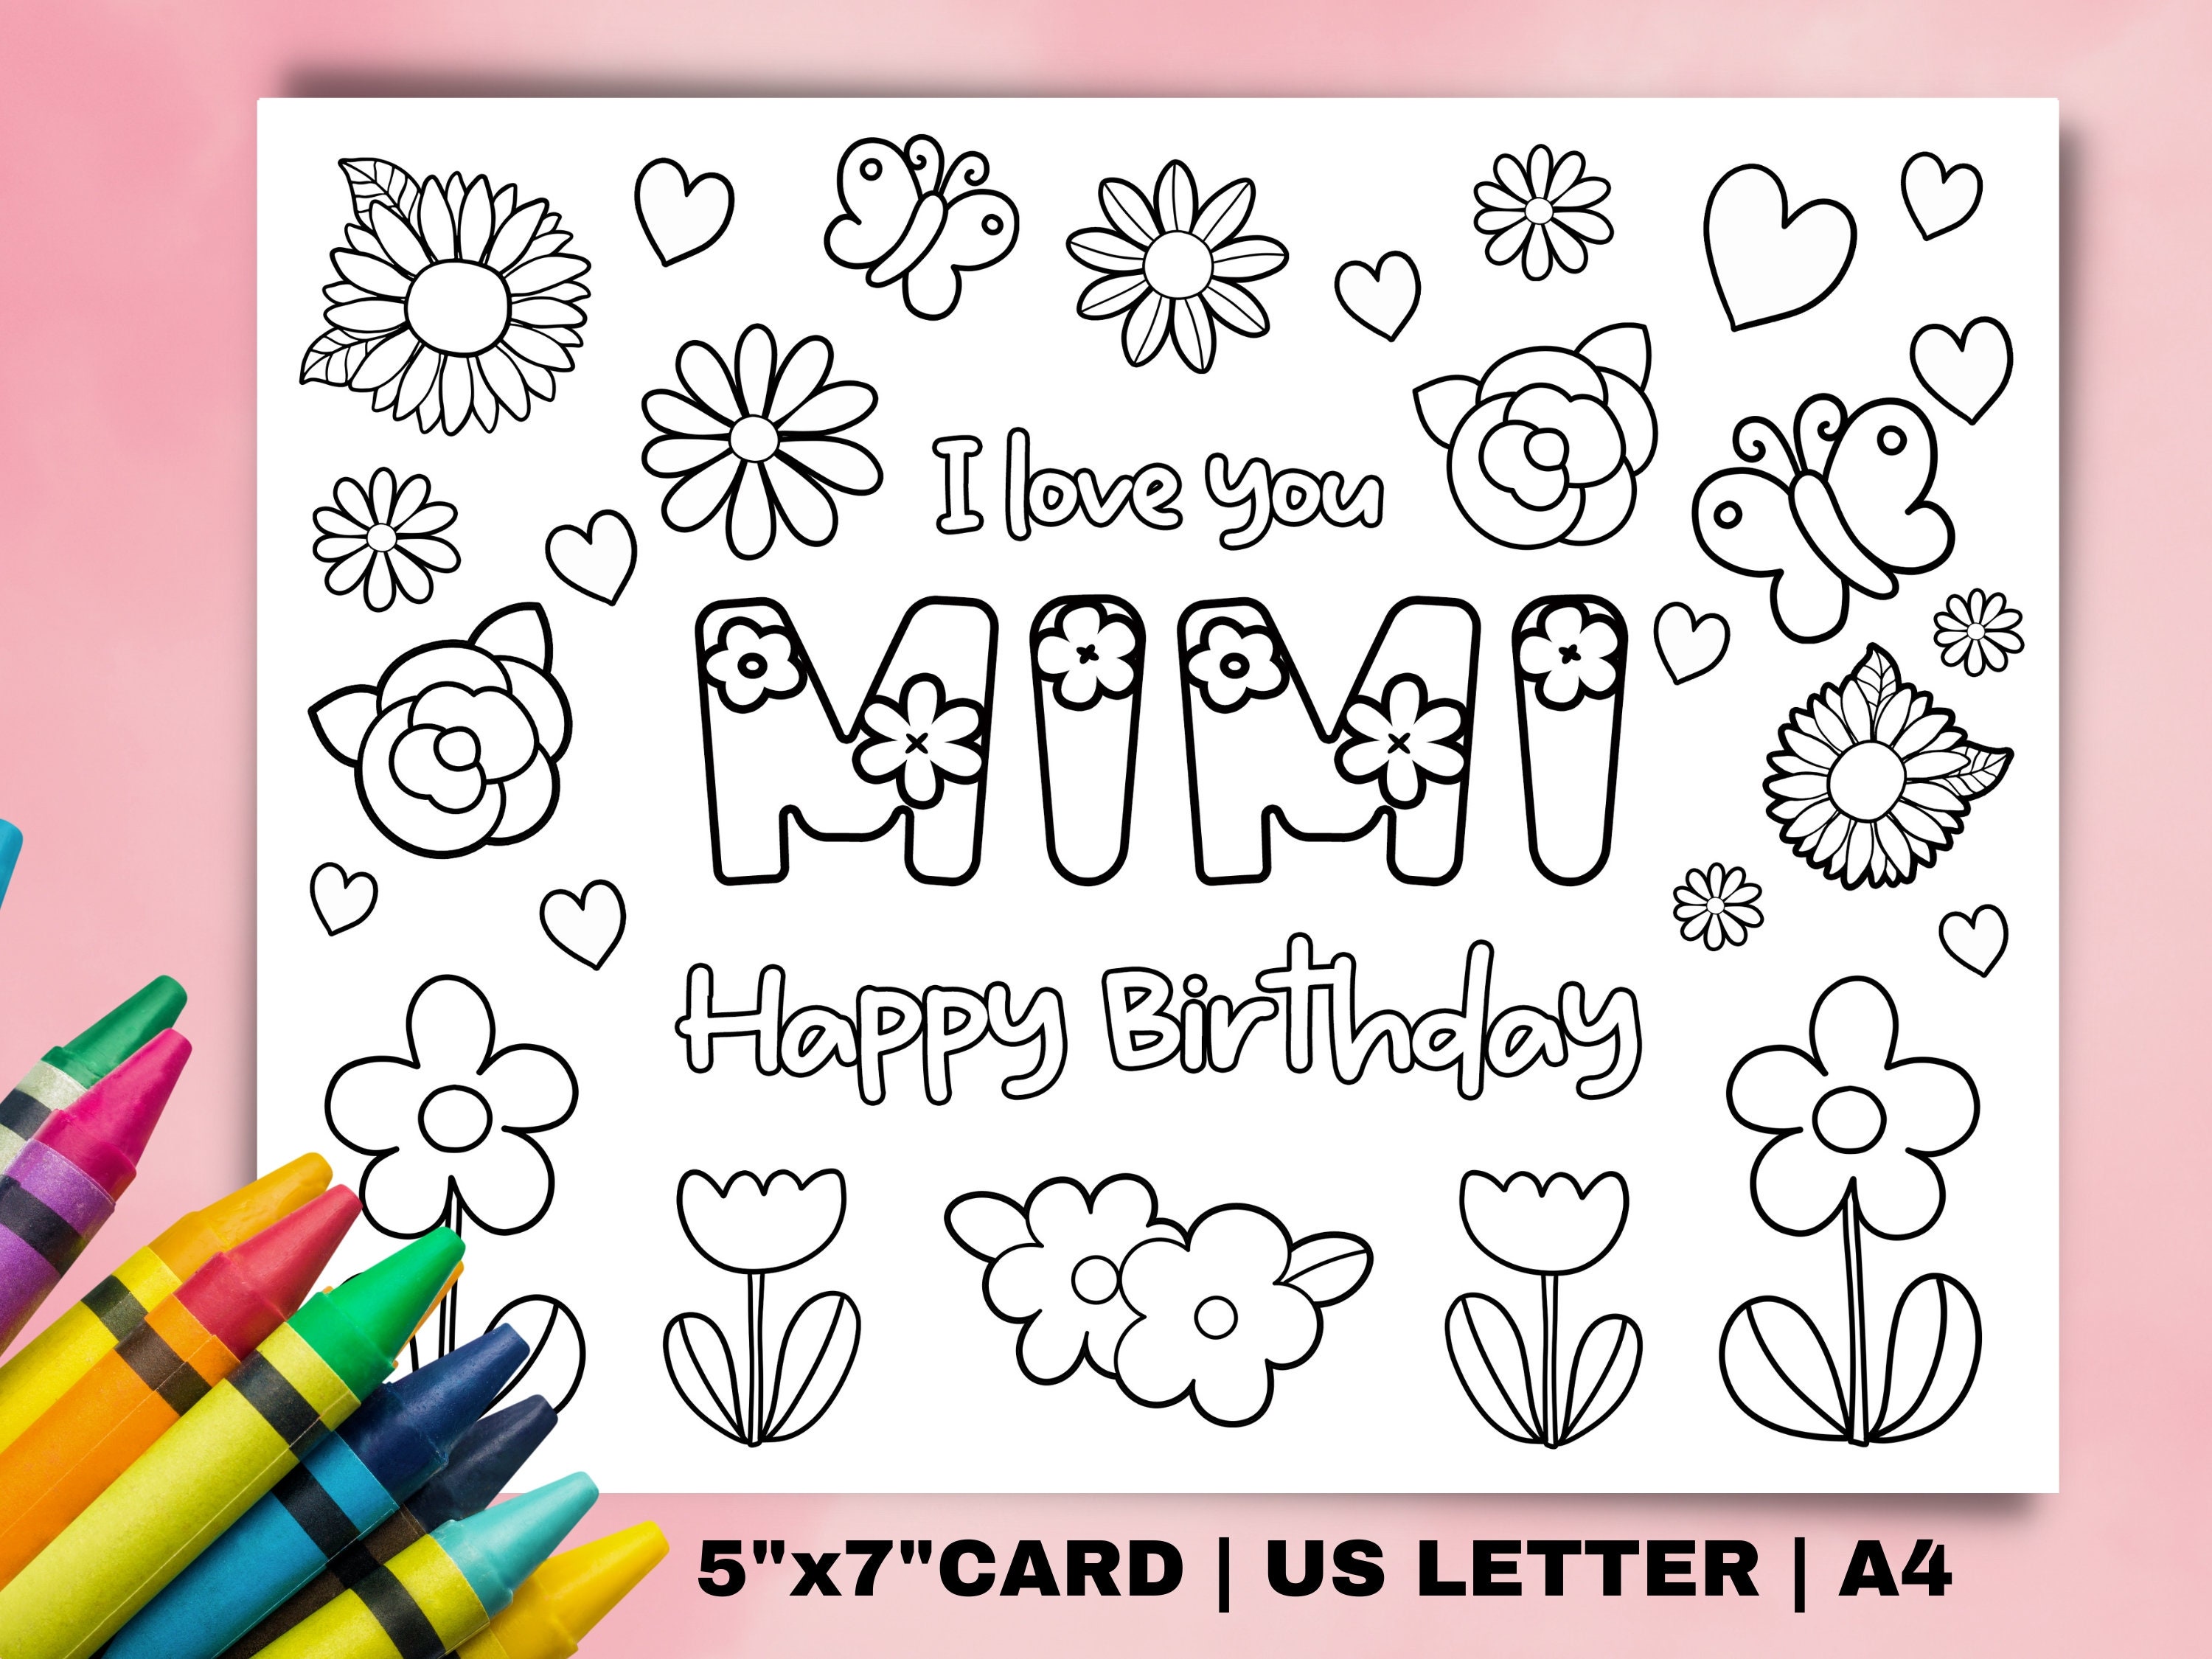 Printable coloring birthday card for mimi grandmother birthday card diy gift kids craft for grandma mimi birthday instant download card